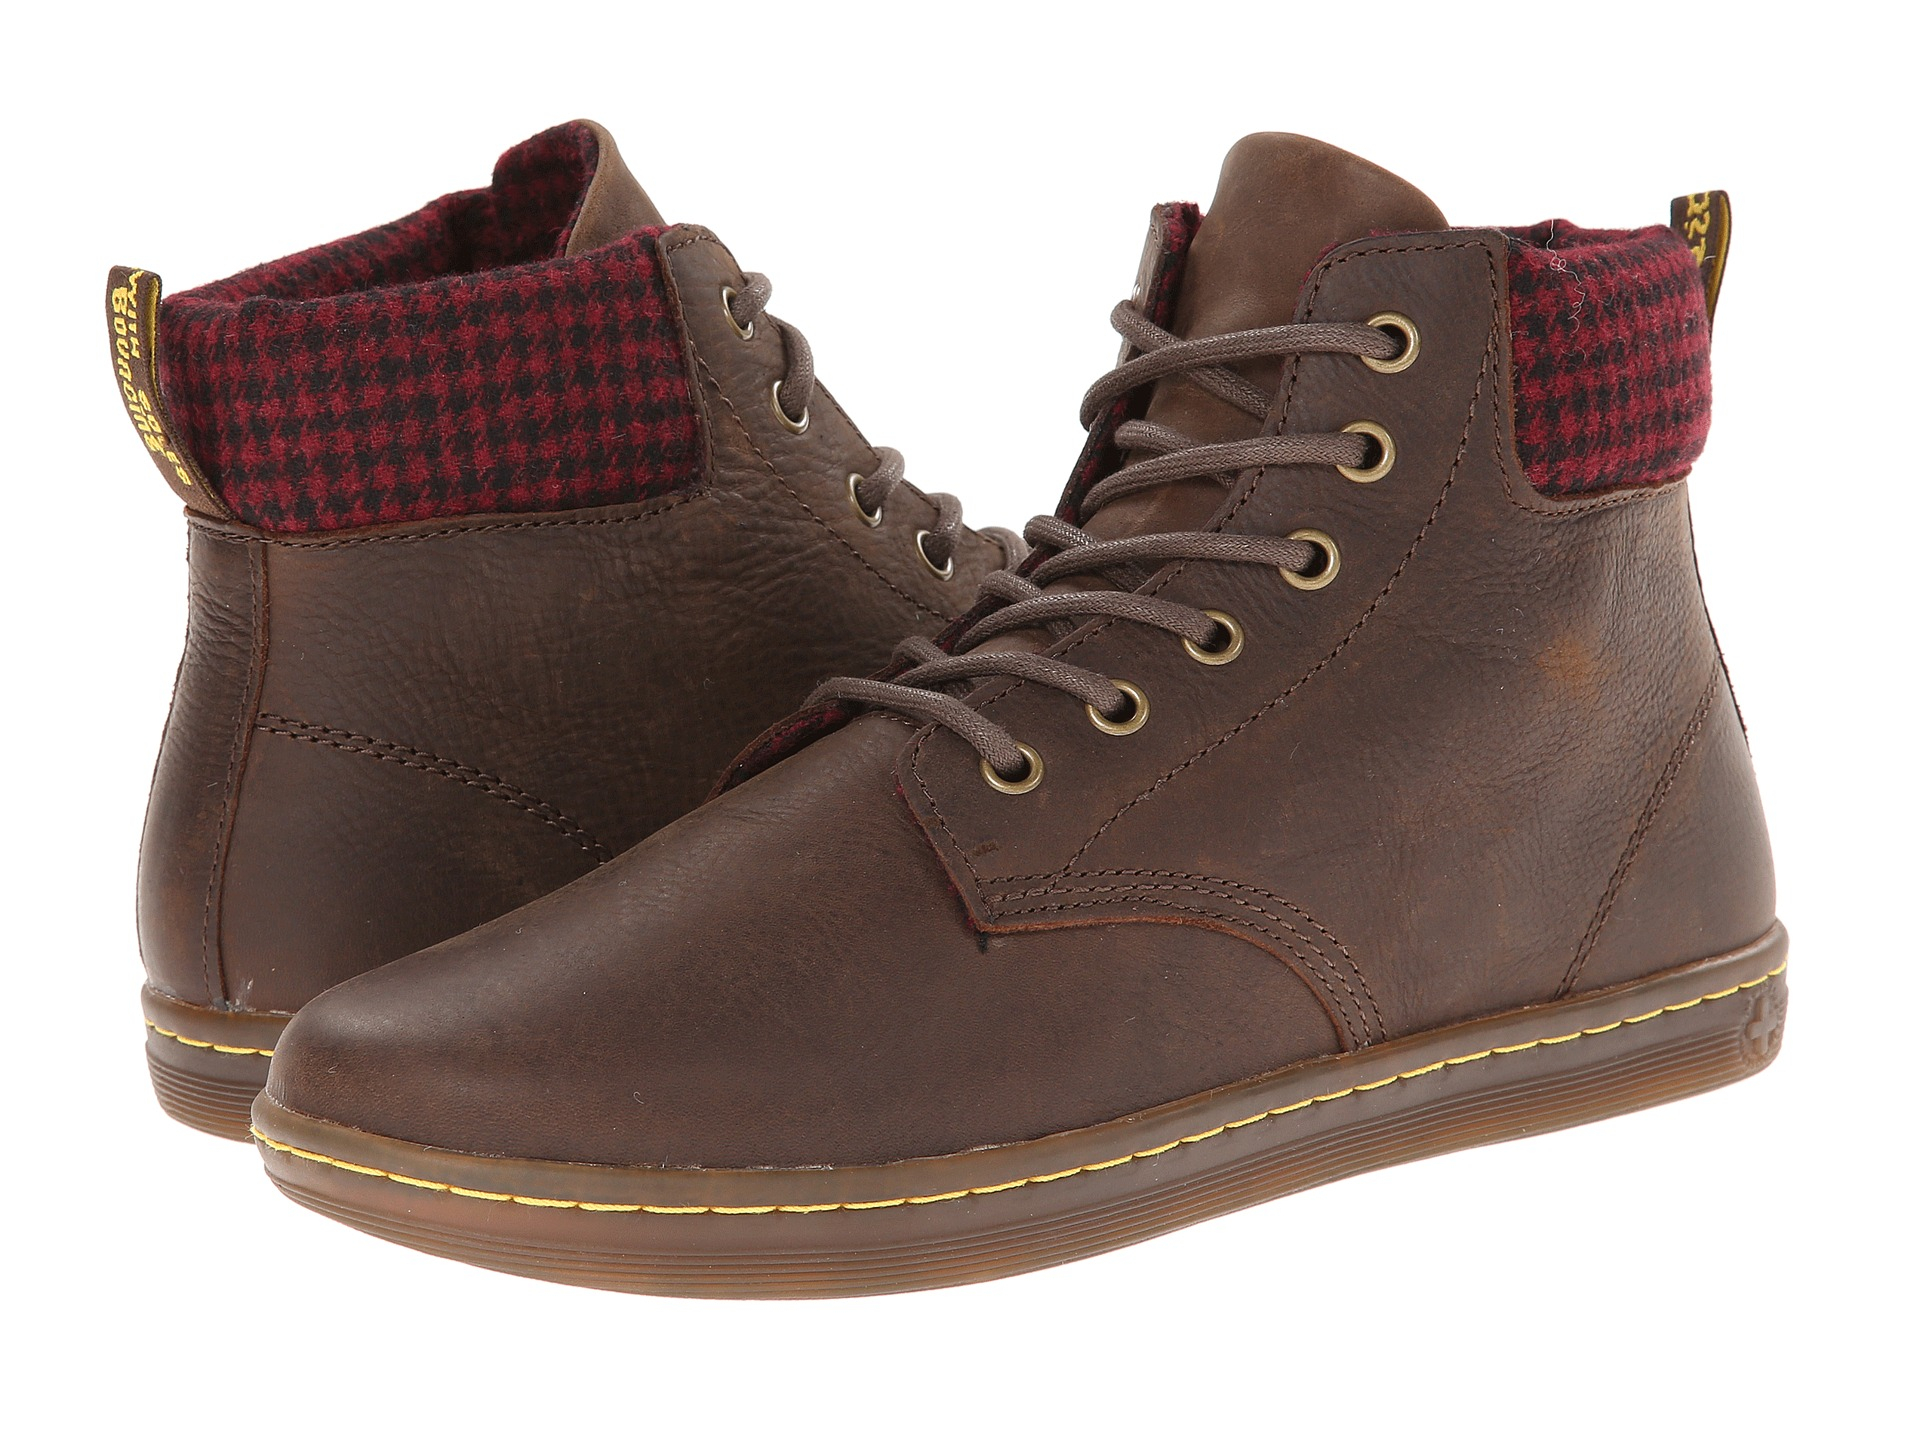 Dr. Martens Maelly Padded Collar Boot in Brown | Lyst